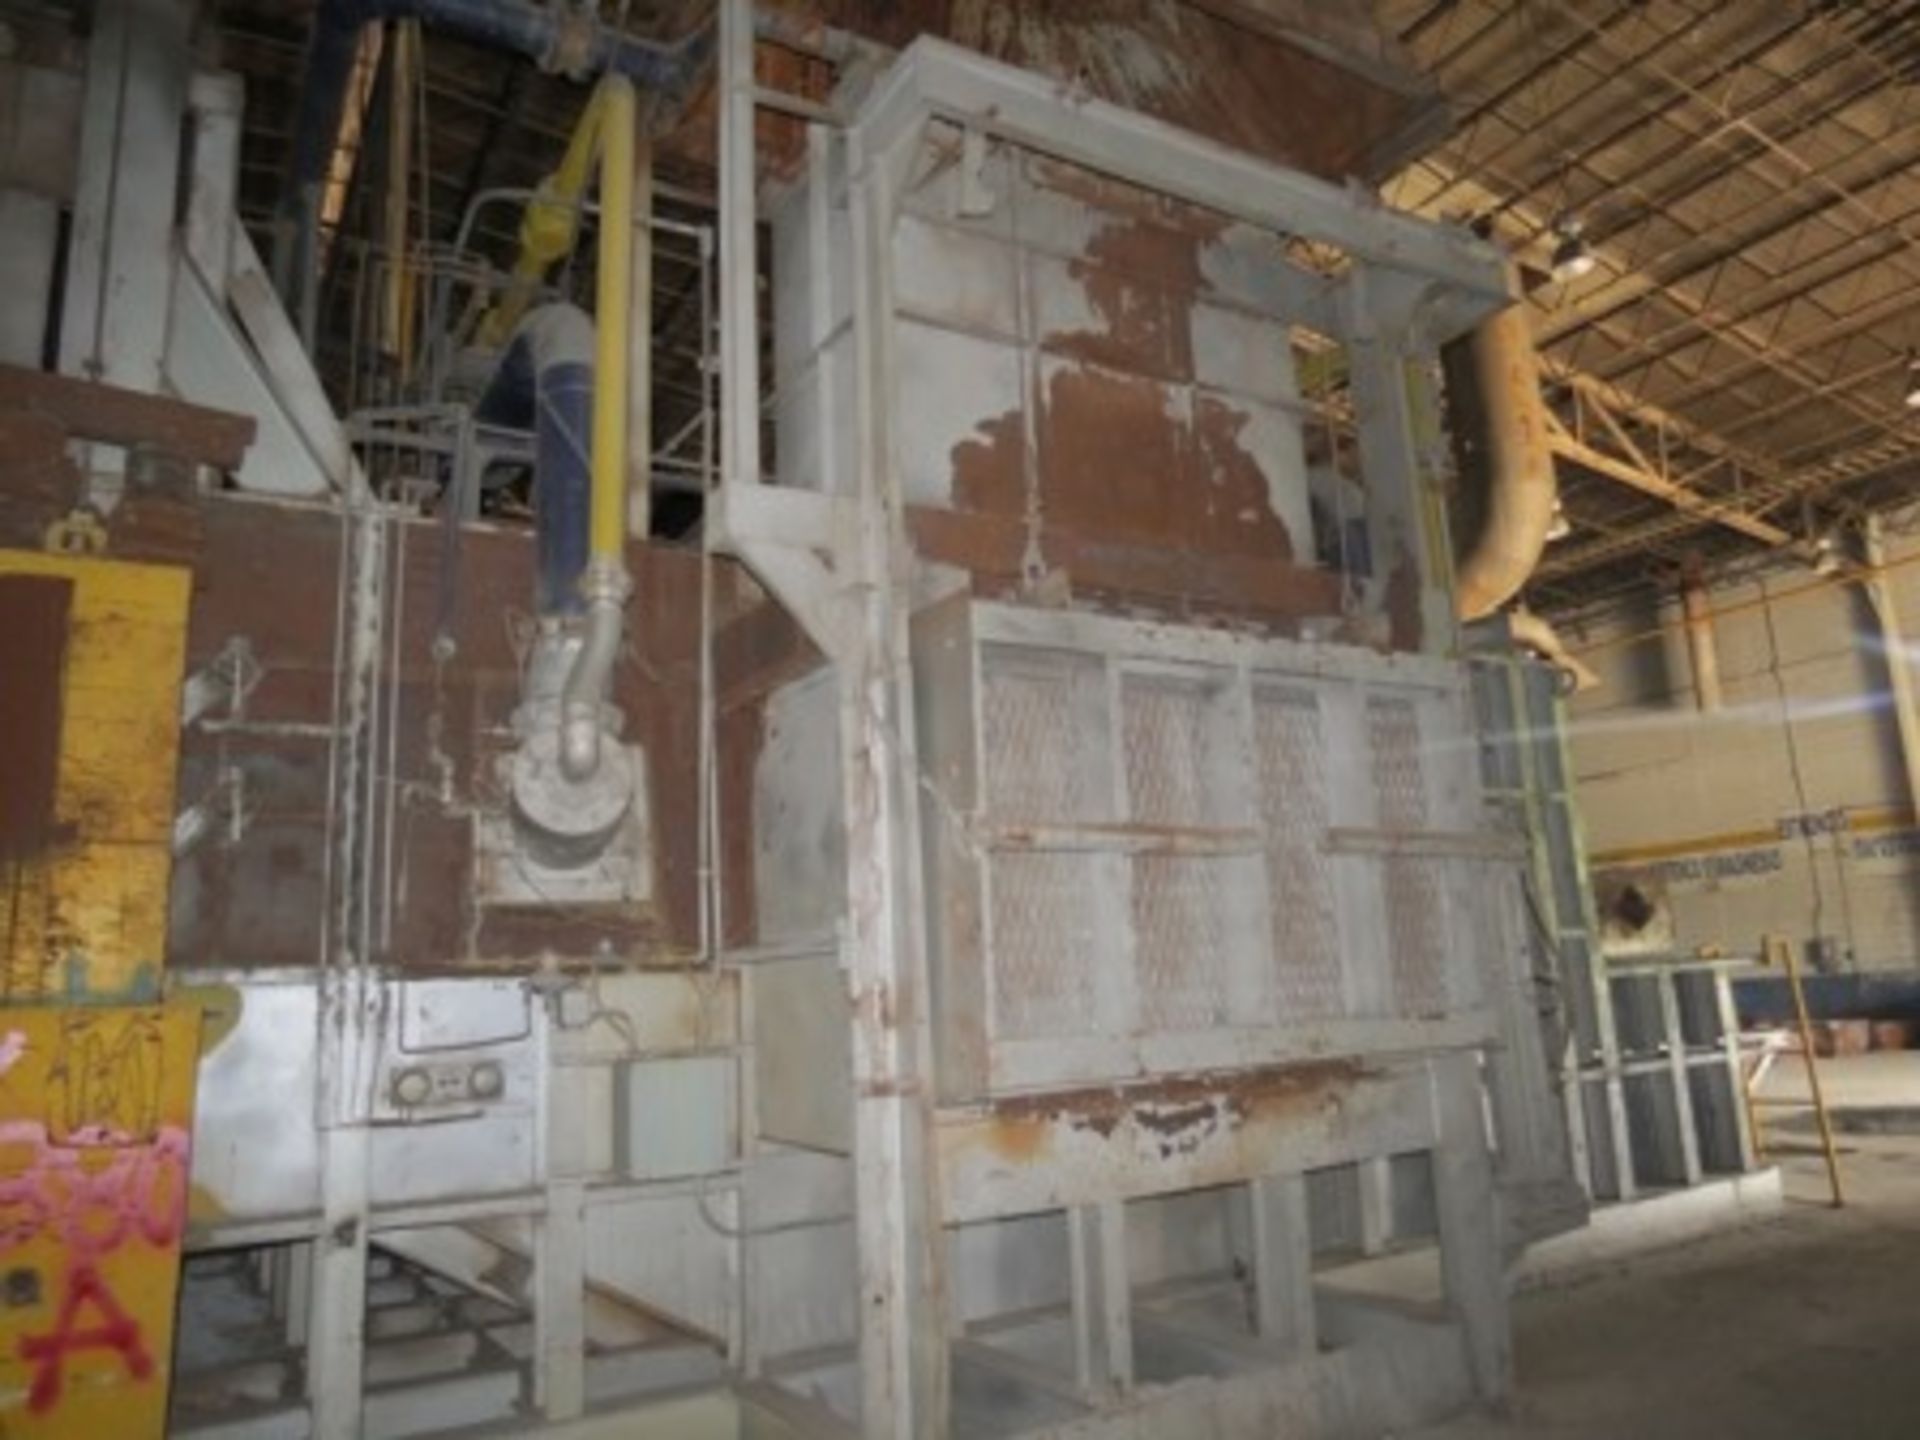 Melting furnace with dumper, hood and ductwork for gas extraction. - Image 15 of 28